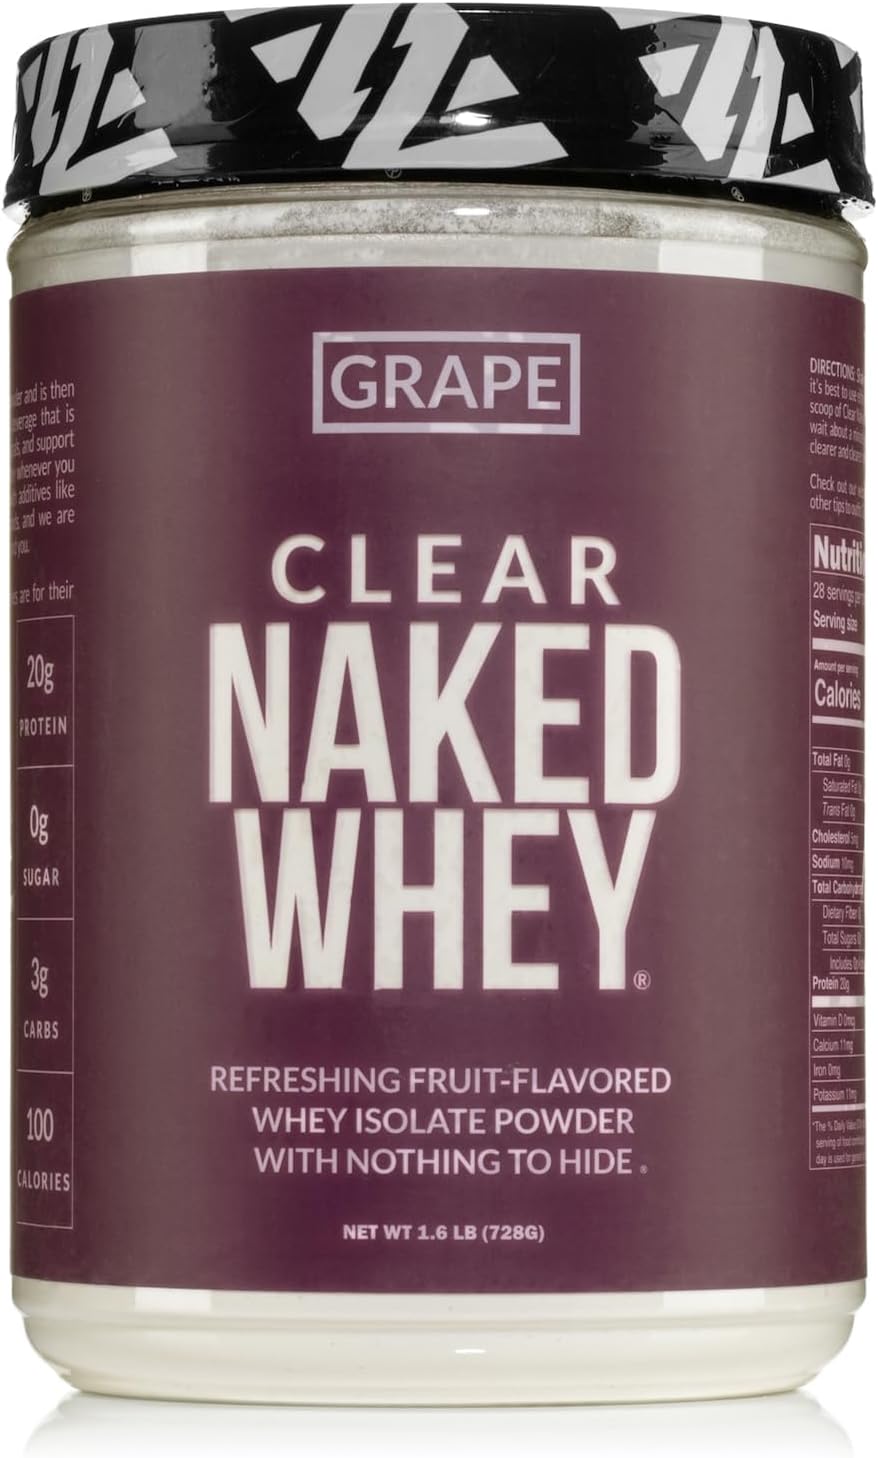 NAKED nutrition Clear Naked Whey Isolate Protein Powder, Grape Flavor, Iso Protein Powder, No Gmos Or Artificial Sweeteners, Gluten-Free, Soy-Free - 28 Servings